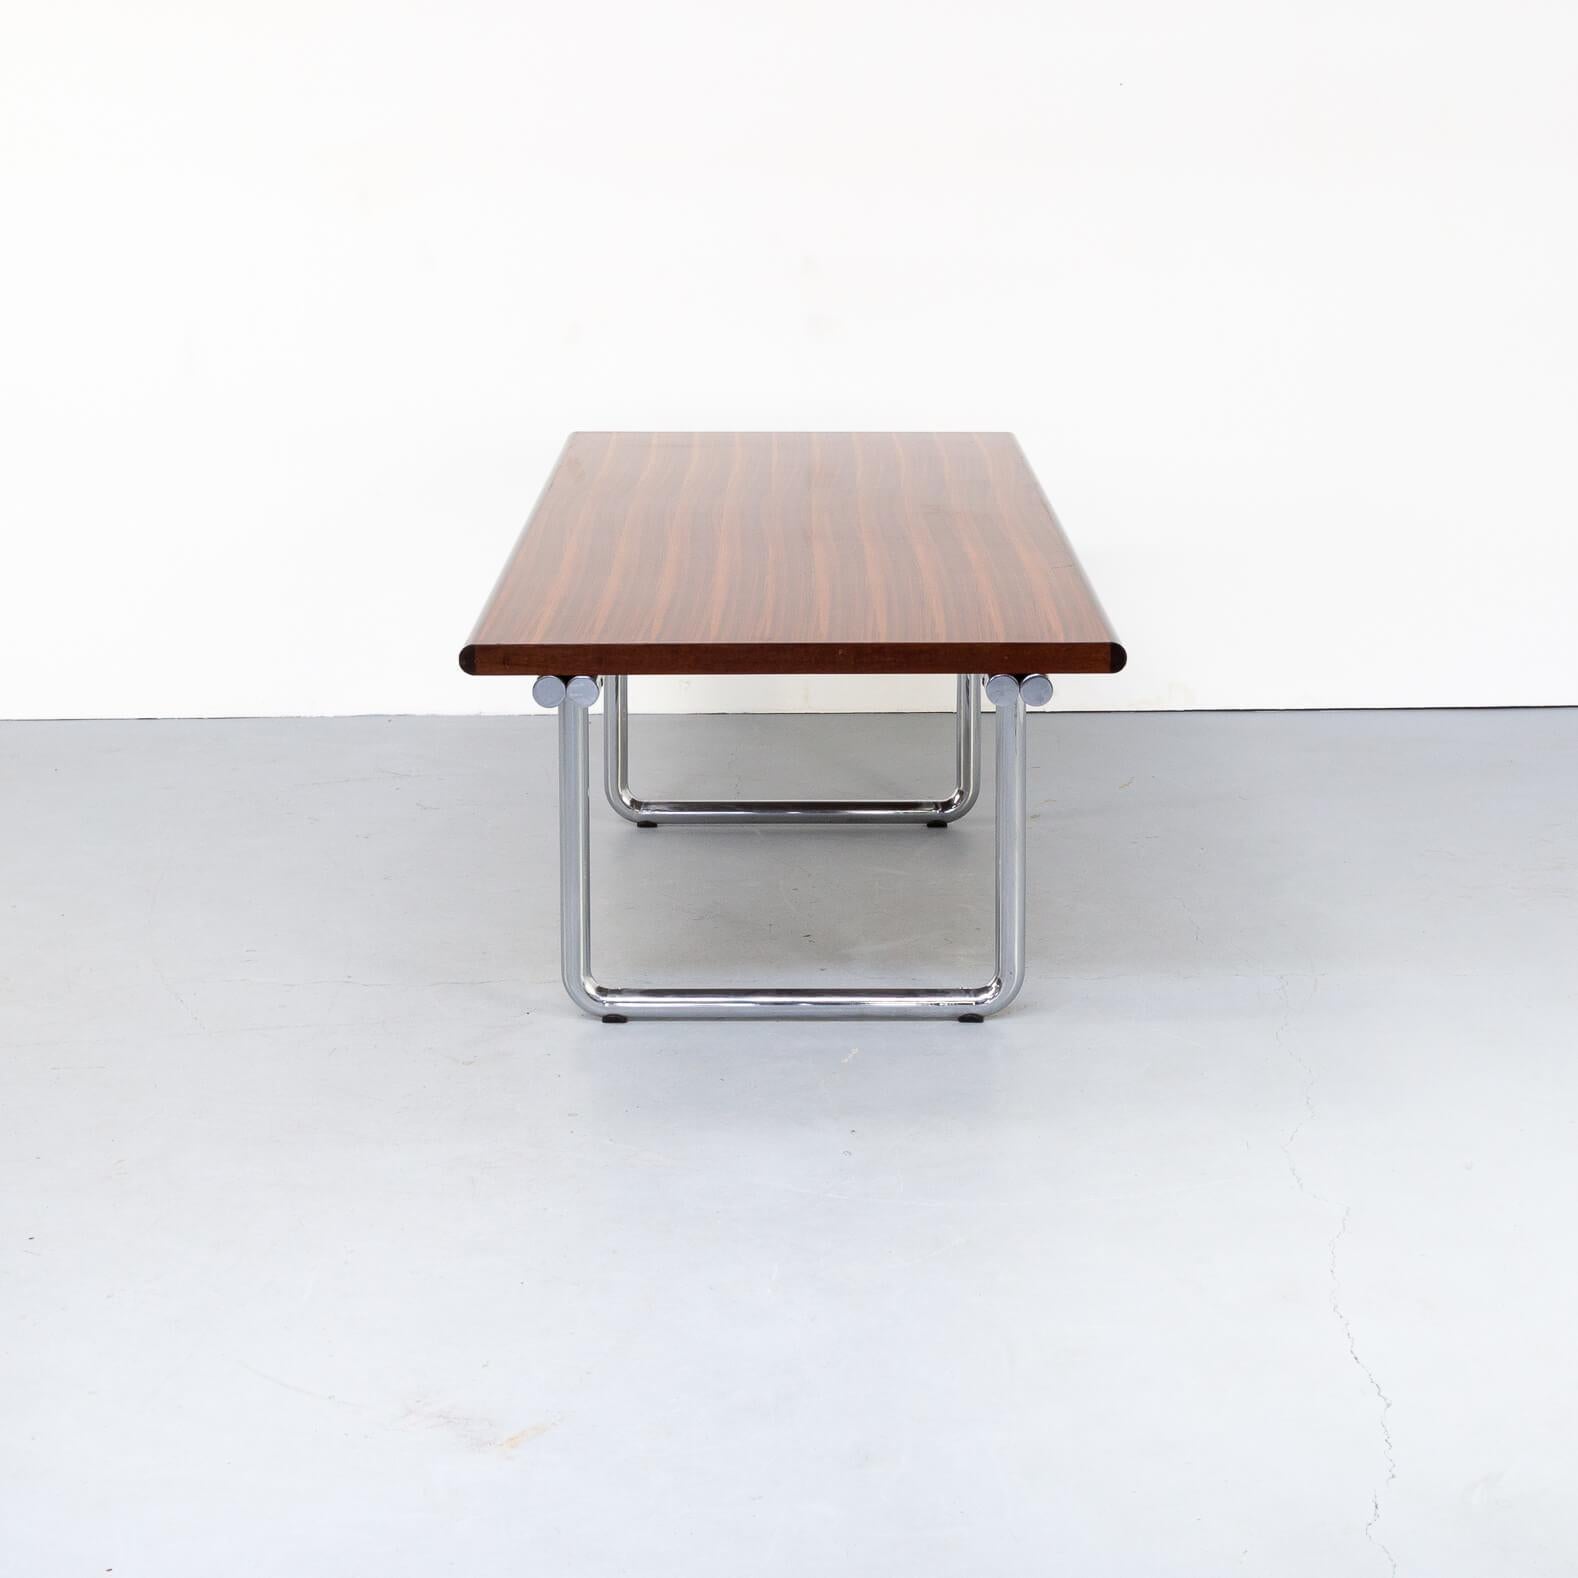 Very beautiful Bauhaus style executive desk table in rosewood veneer table top and chrome tubular frame.